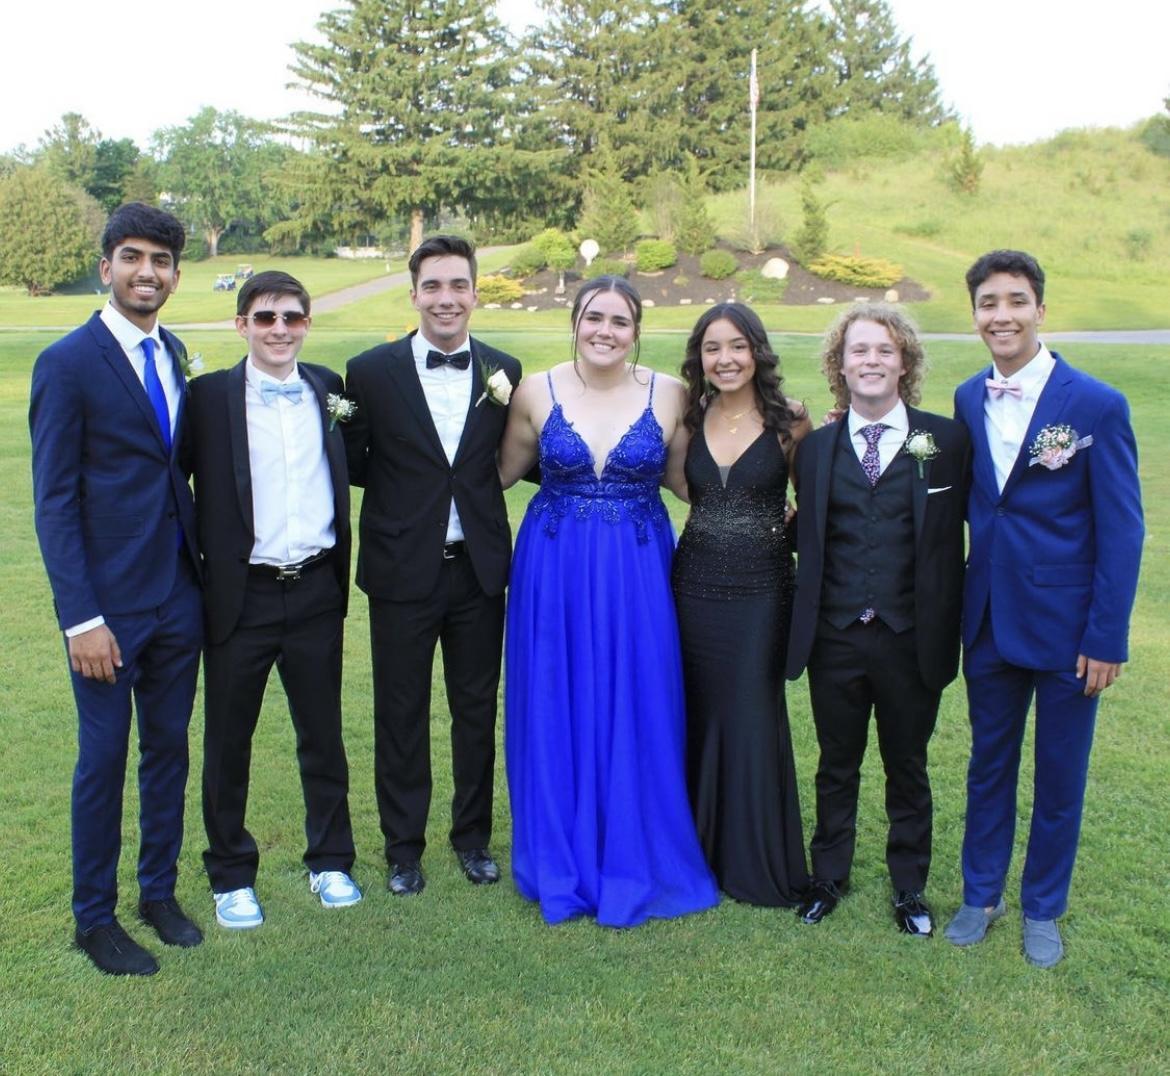 A+group+picture+from+the+Senior+Ball.+Photo+Credit%3A+Nathan+Bourcy+%2822%29